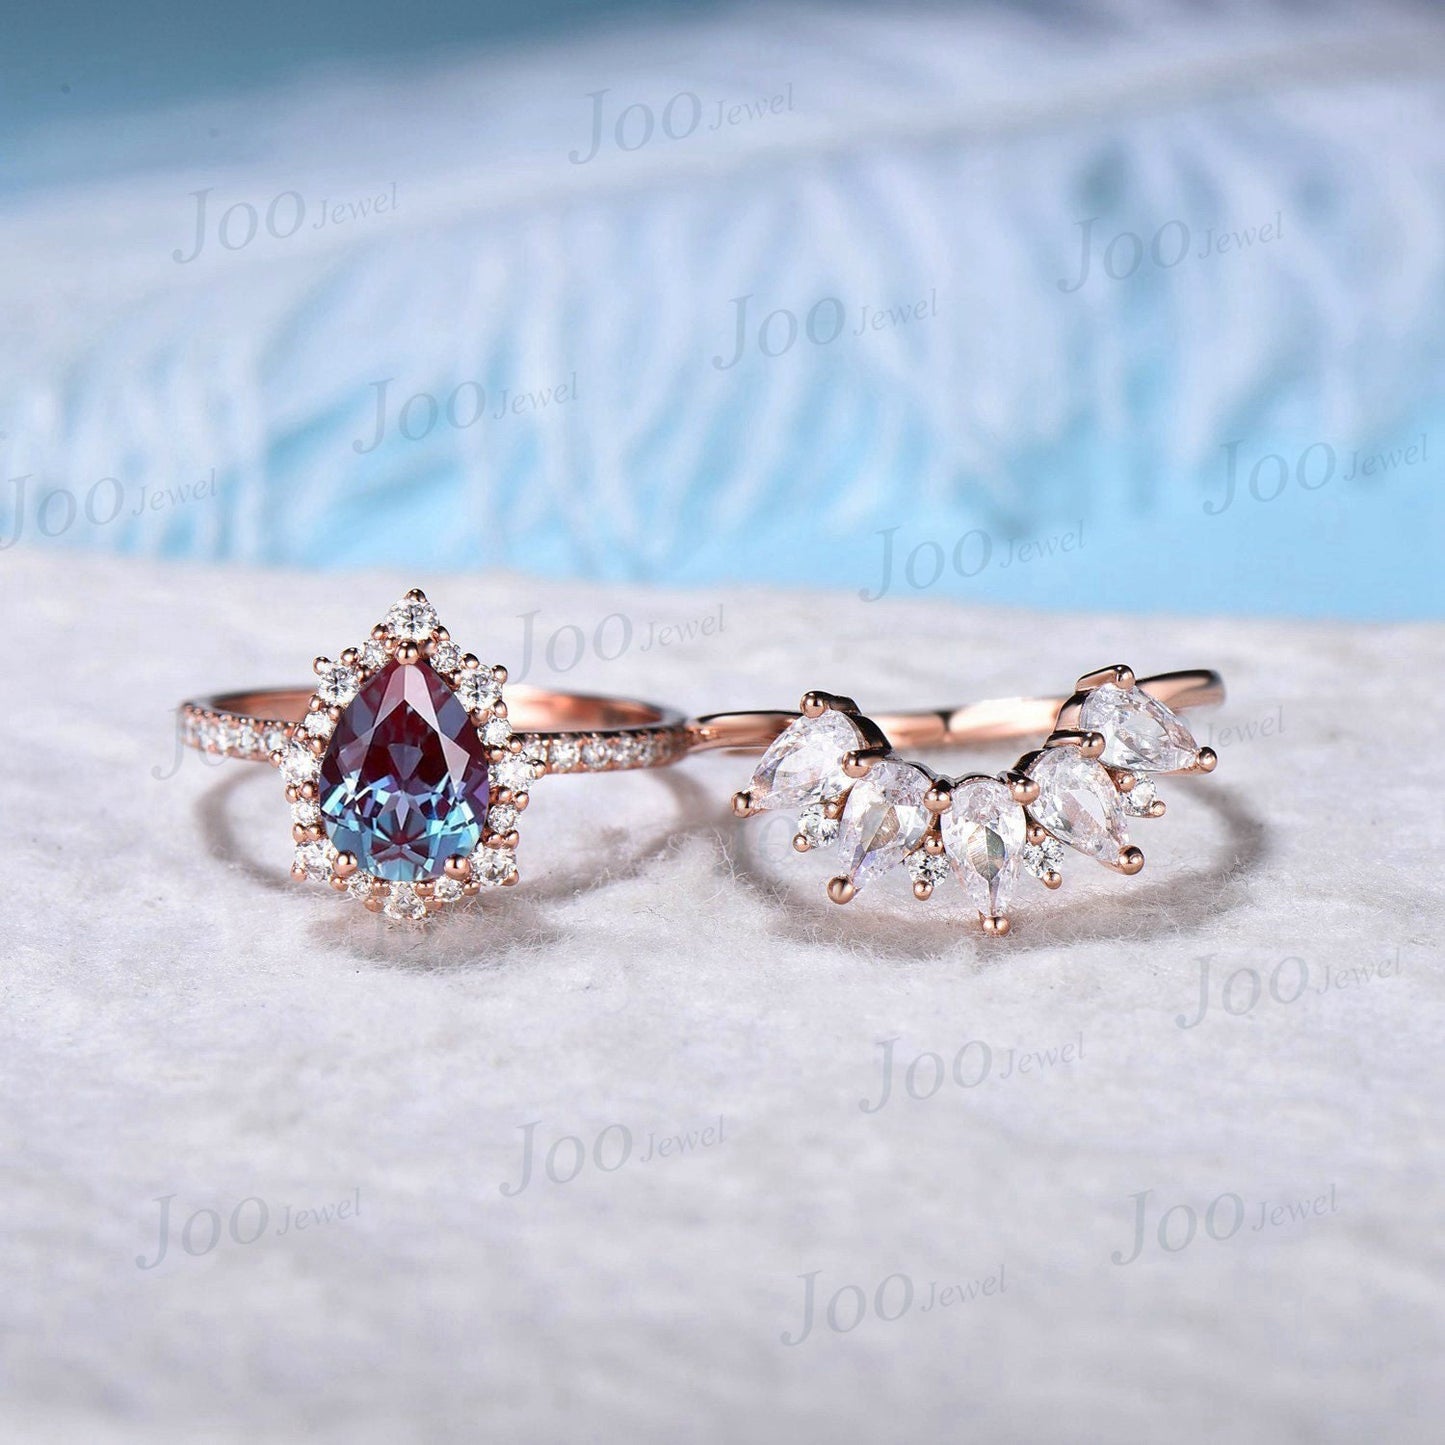 2pcs Pear Shaped Halo Solitaire Alexandrite Ring Set Half Eternity Moissanite Band Luxy Color Changing Alexandrite Cocktail Statement Rings